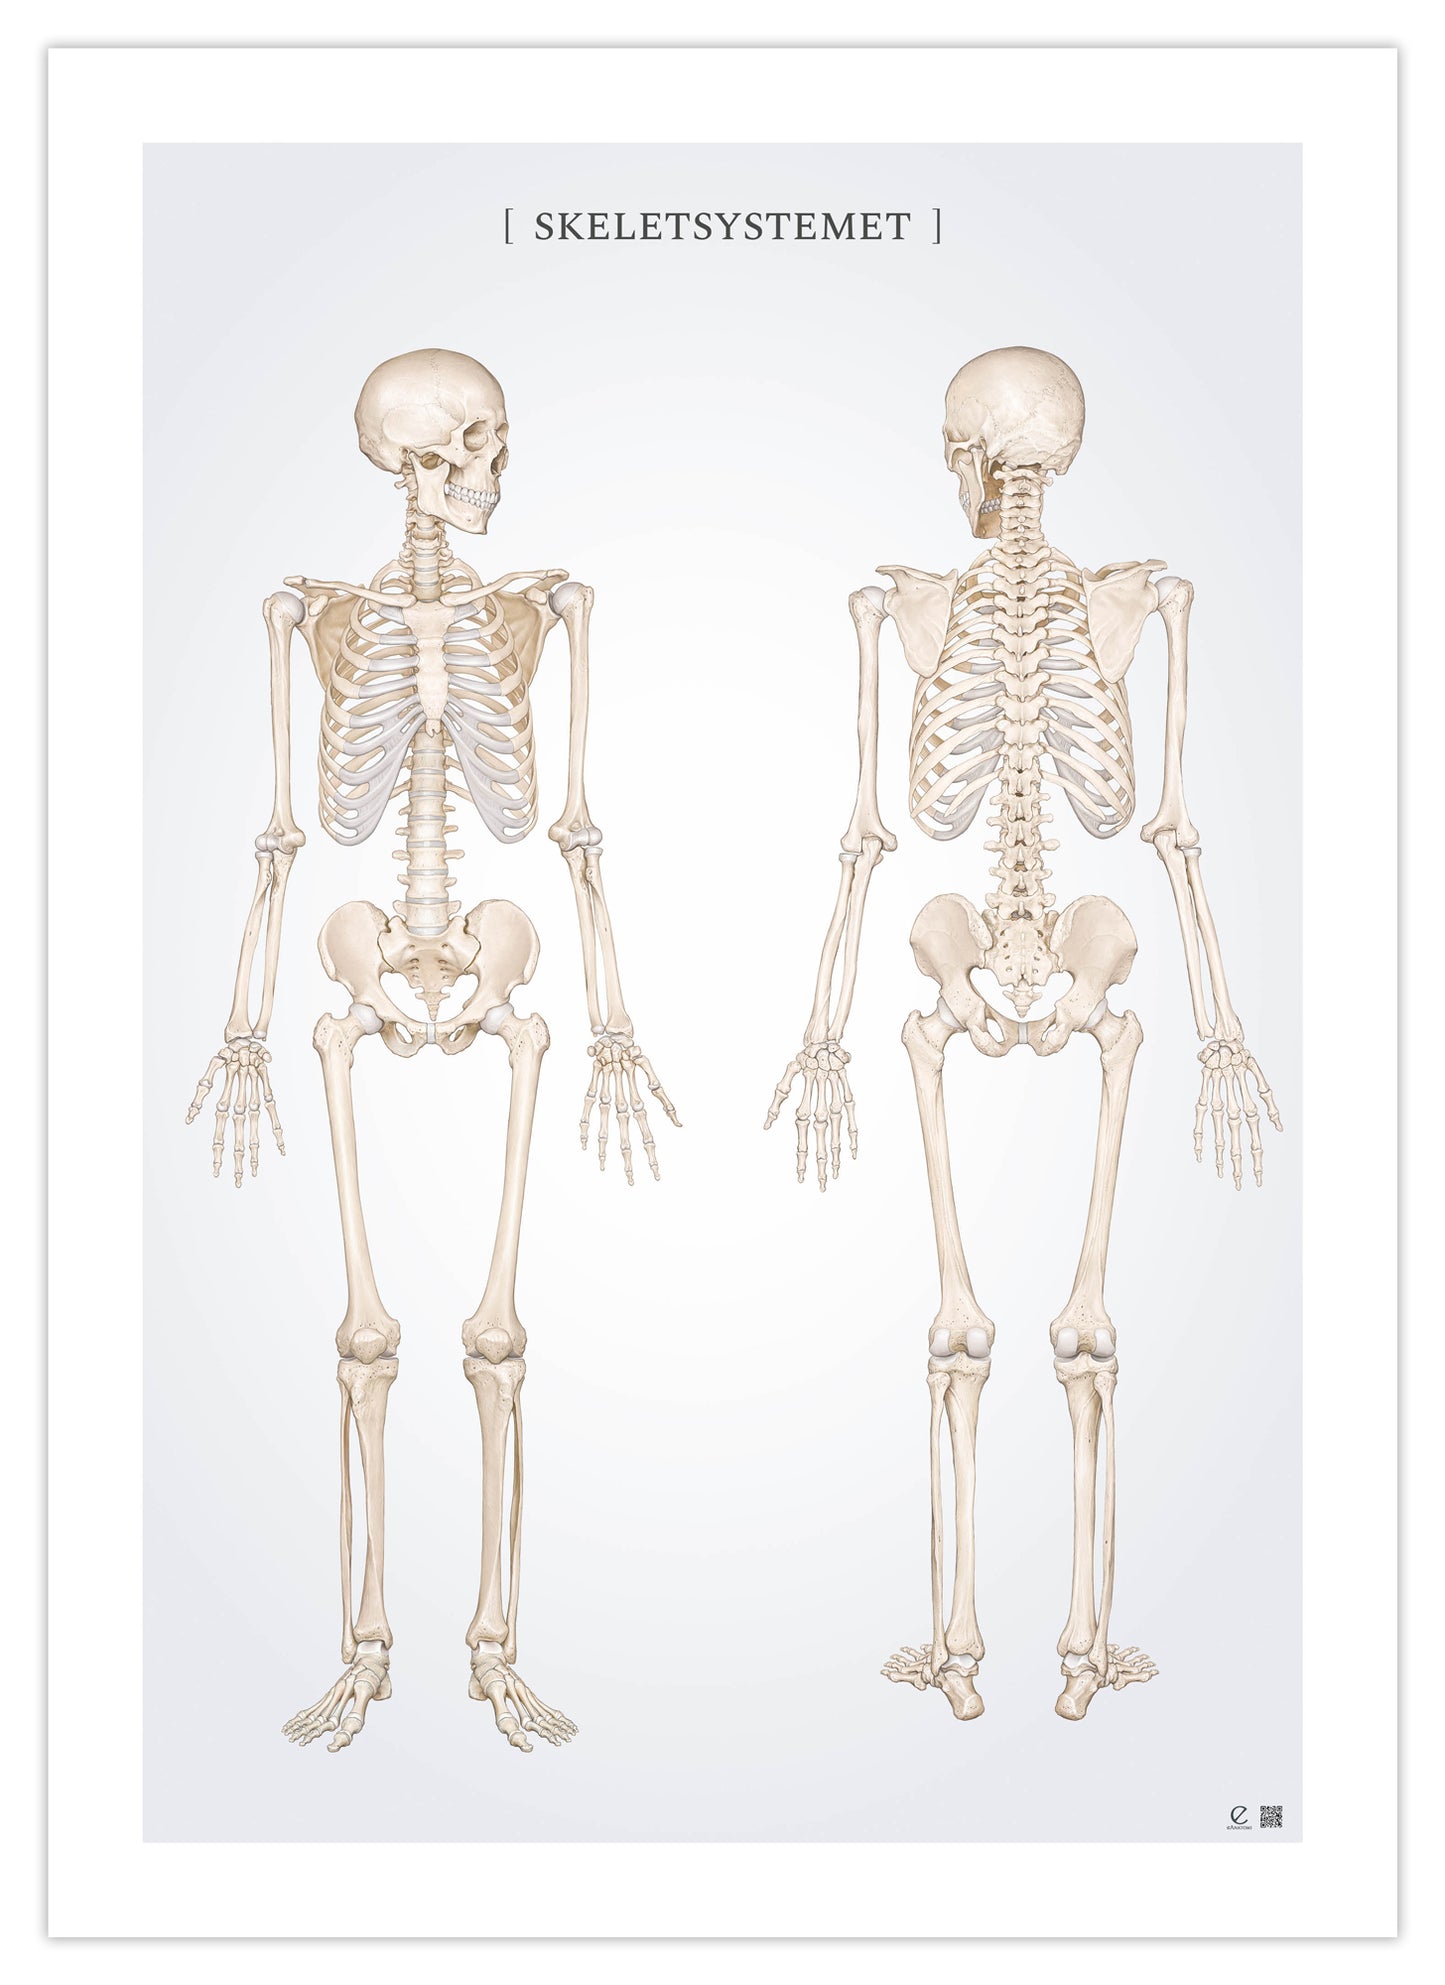 Anatomy poster - The skeletal system